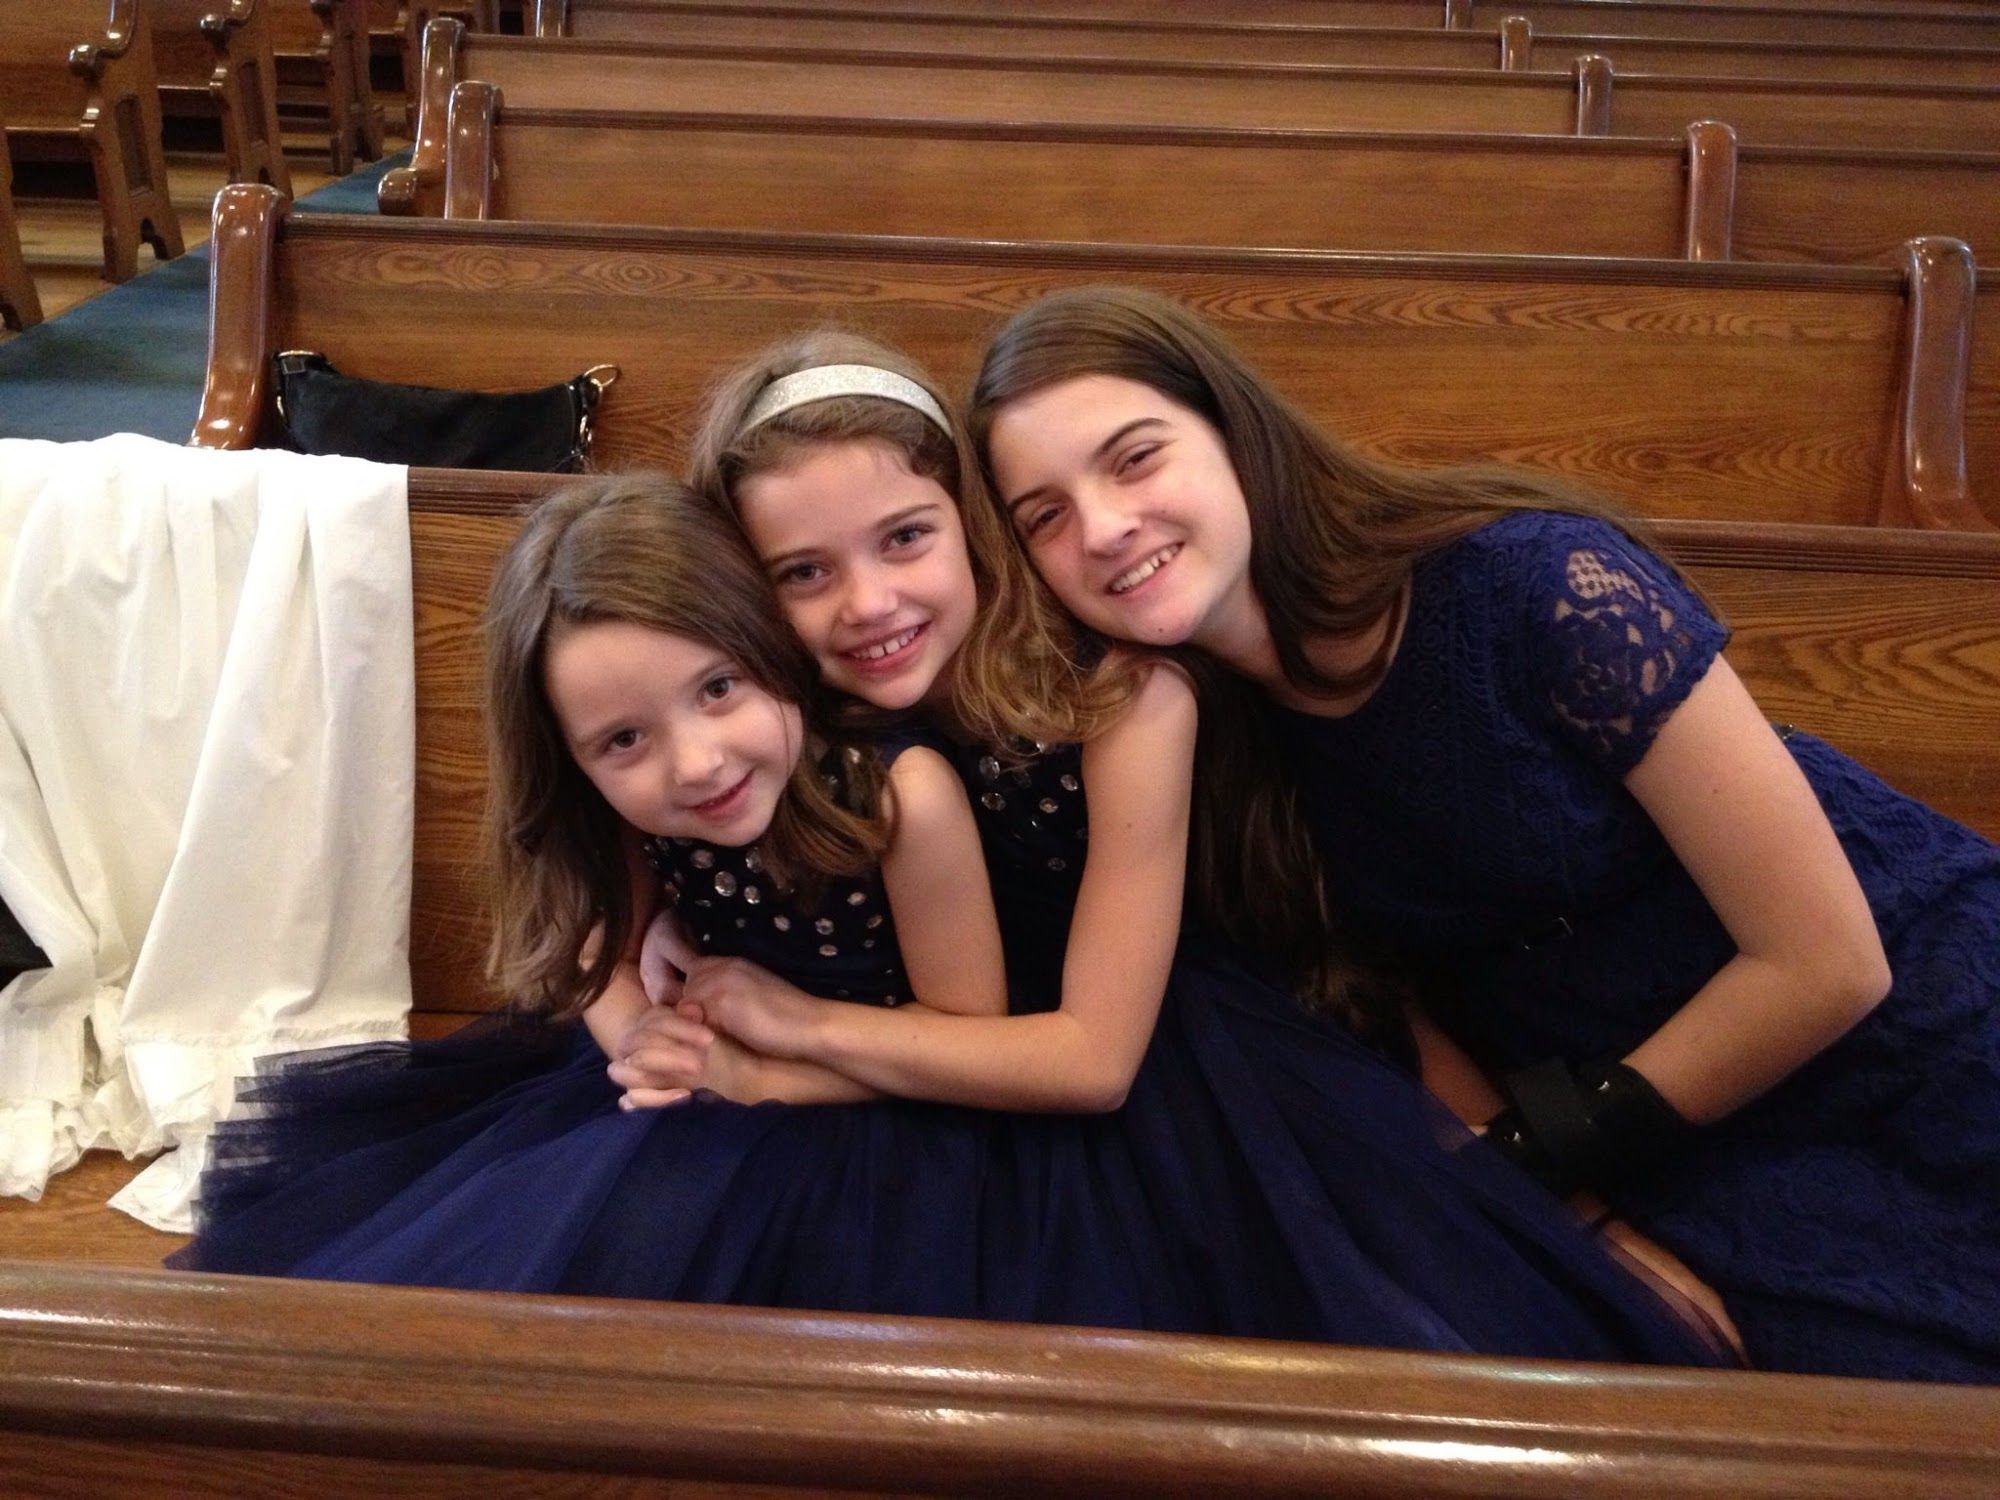  Three sisters getting ready for their sister's baptism. 